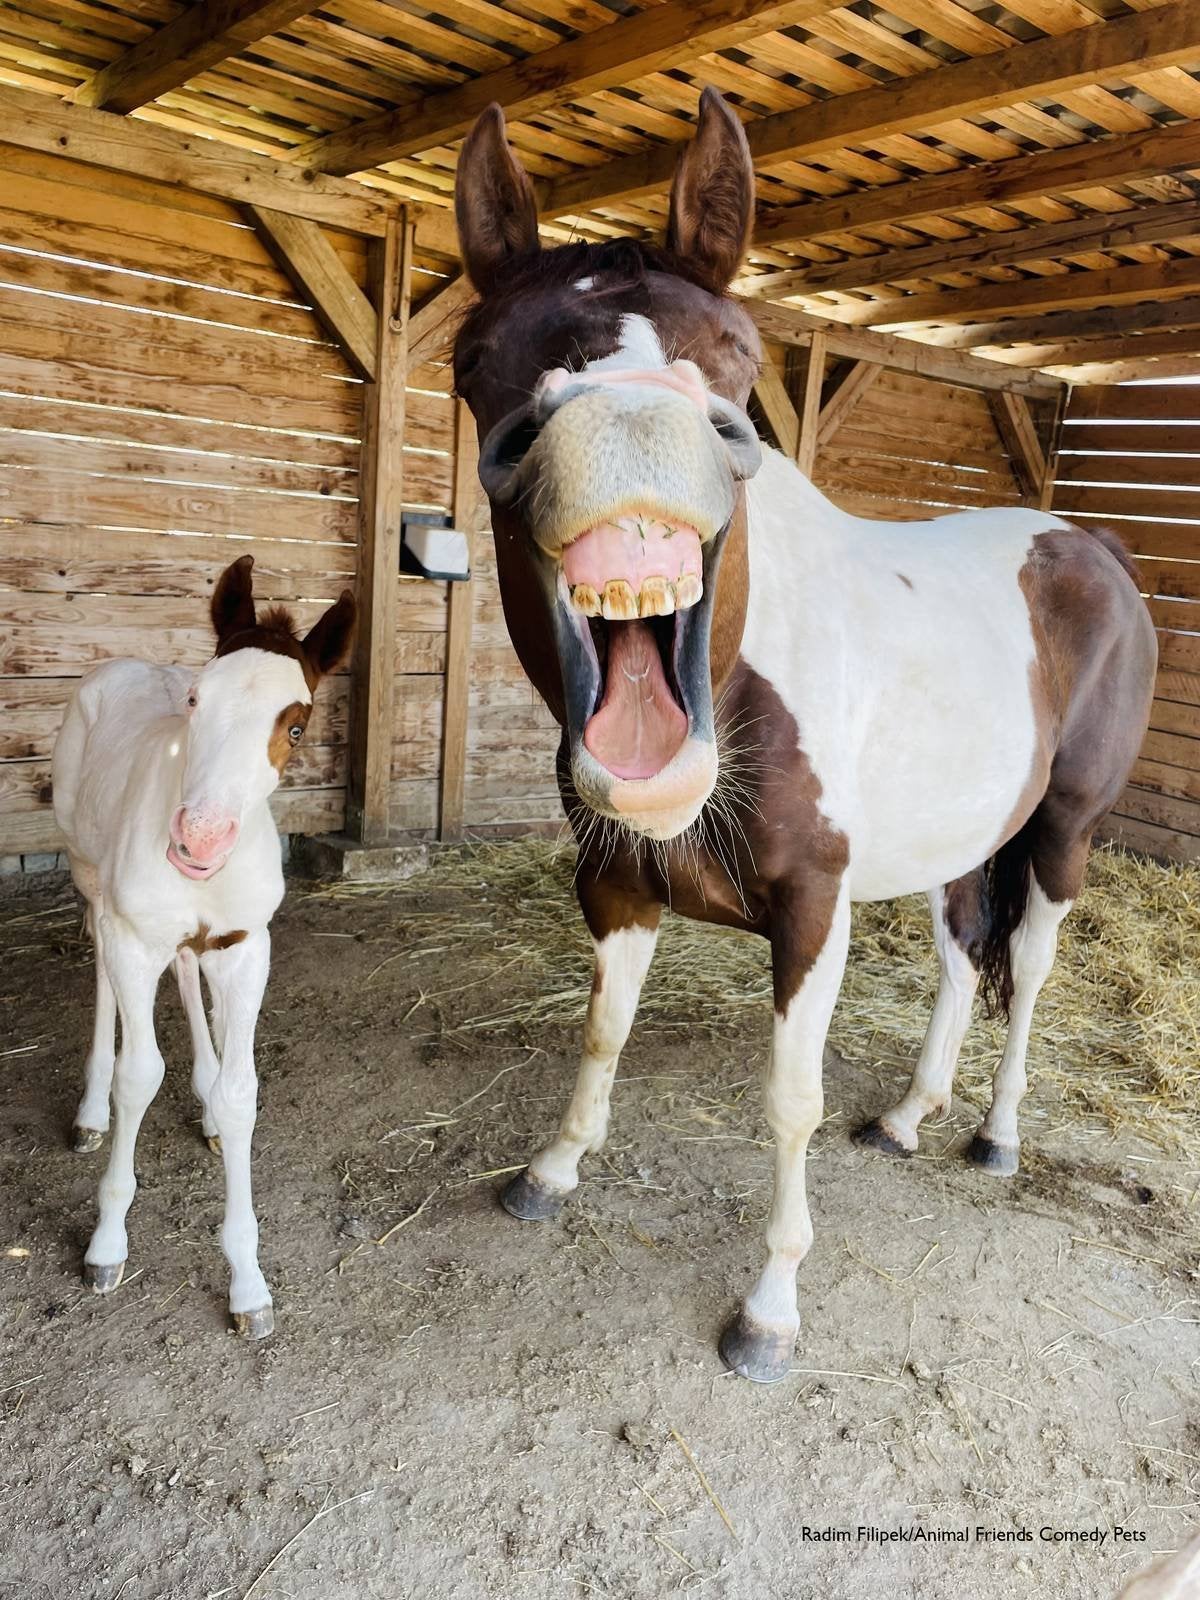 Goofy horse with a big smile.